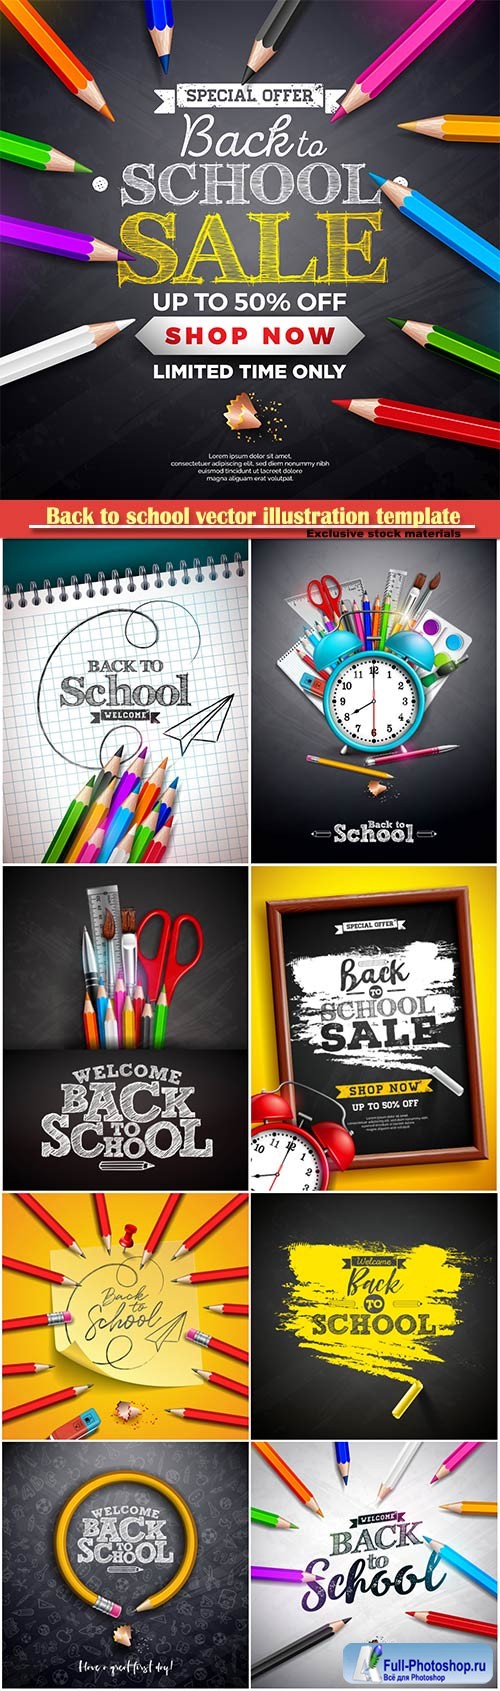 Back to school vector illustration template # 14